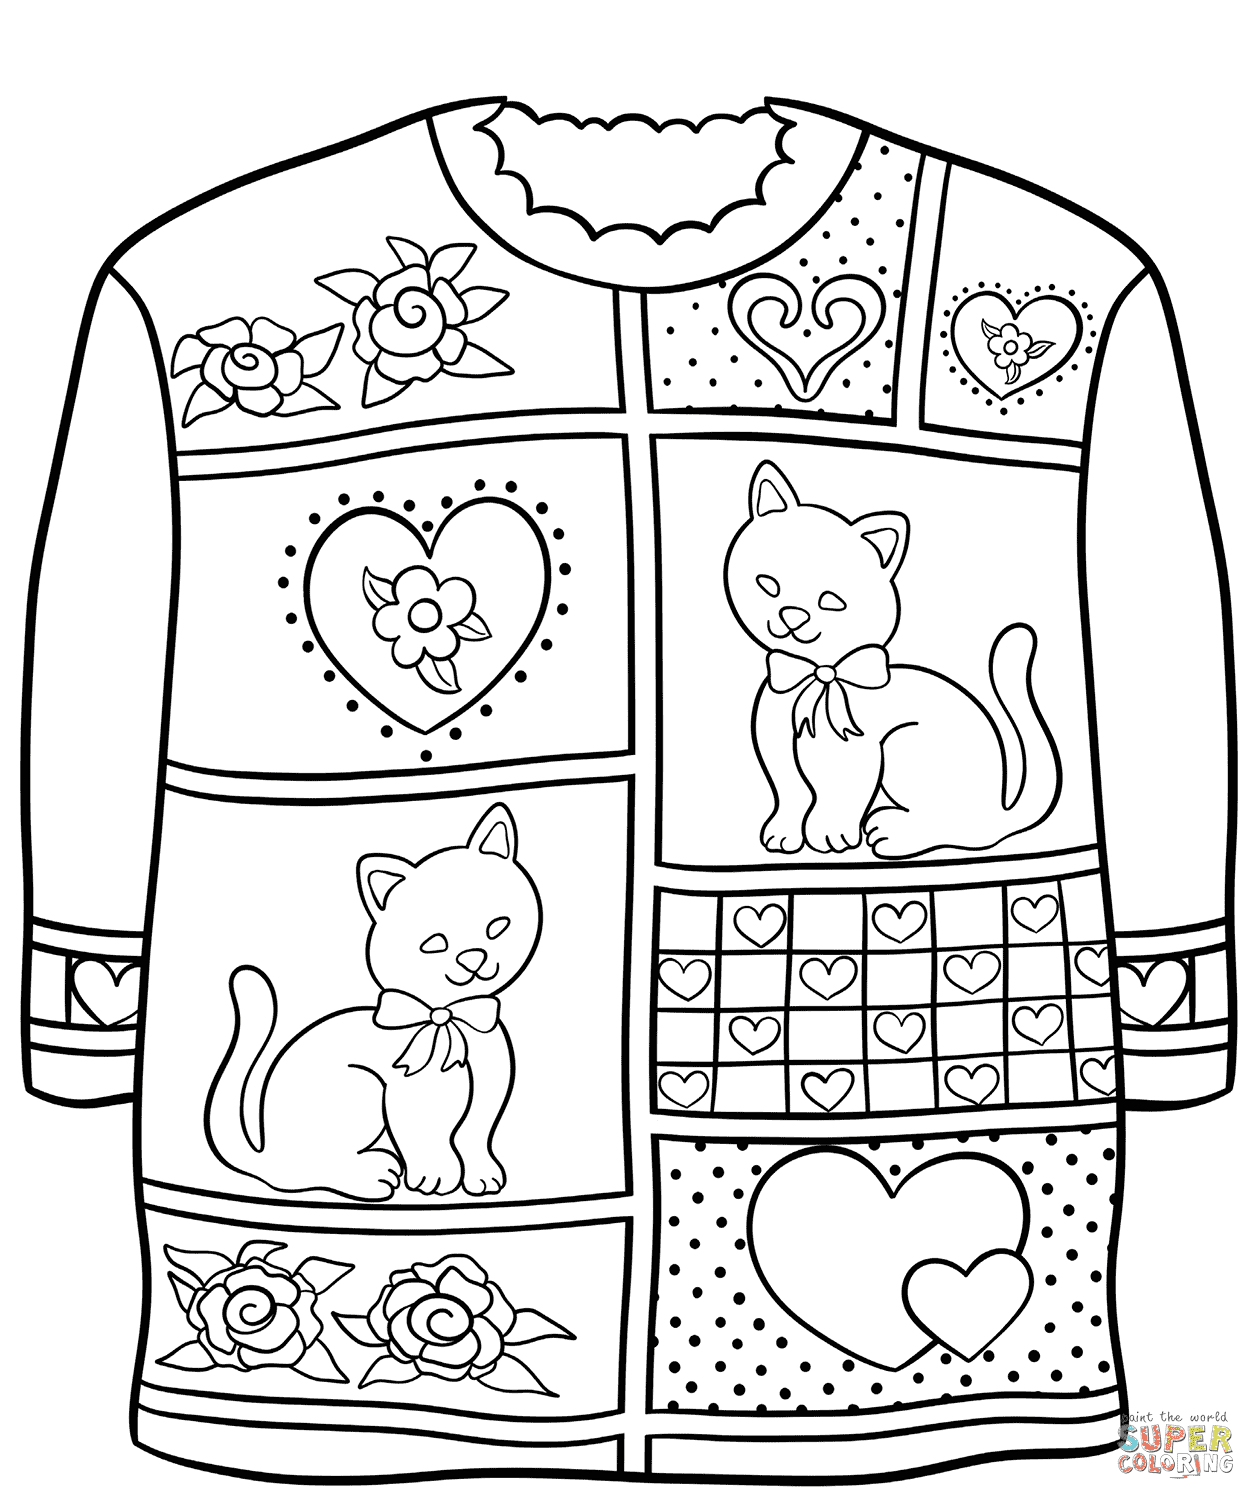 Sweater with Christmas Pattern Coloring Page